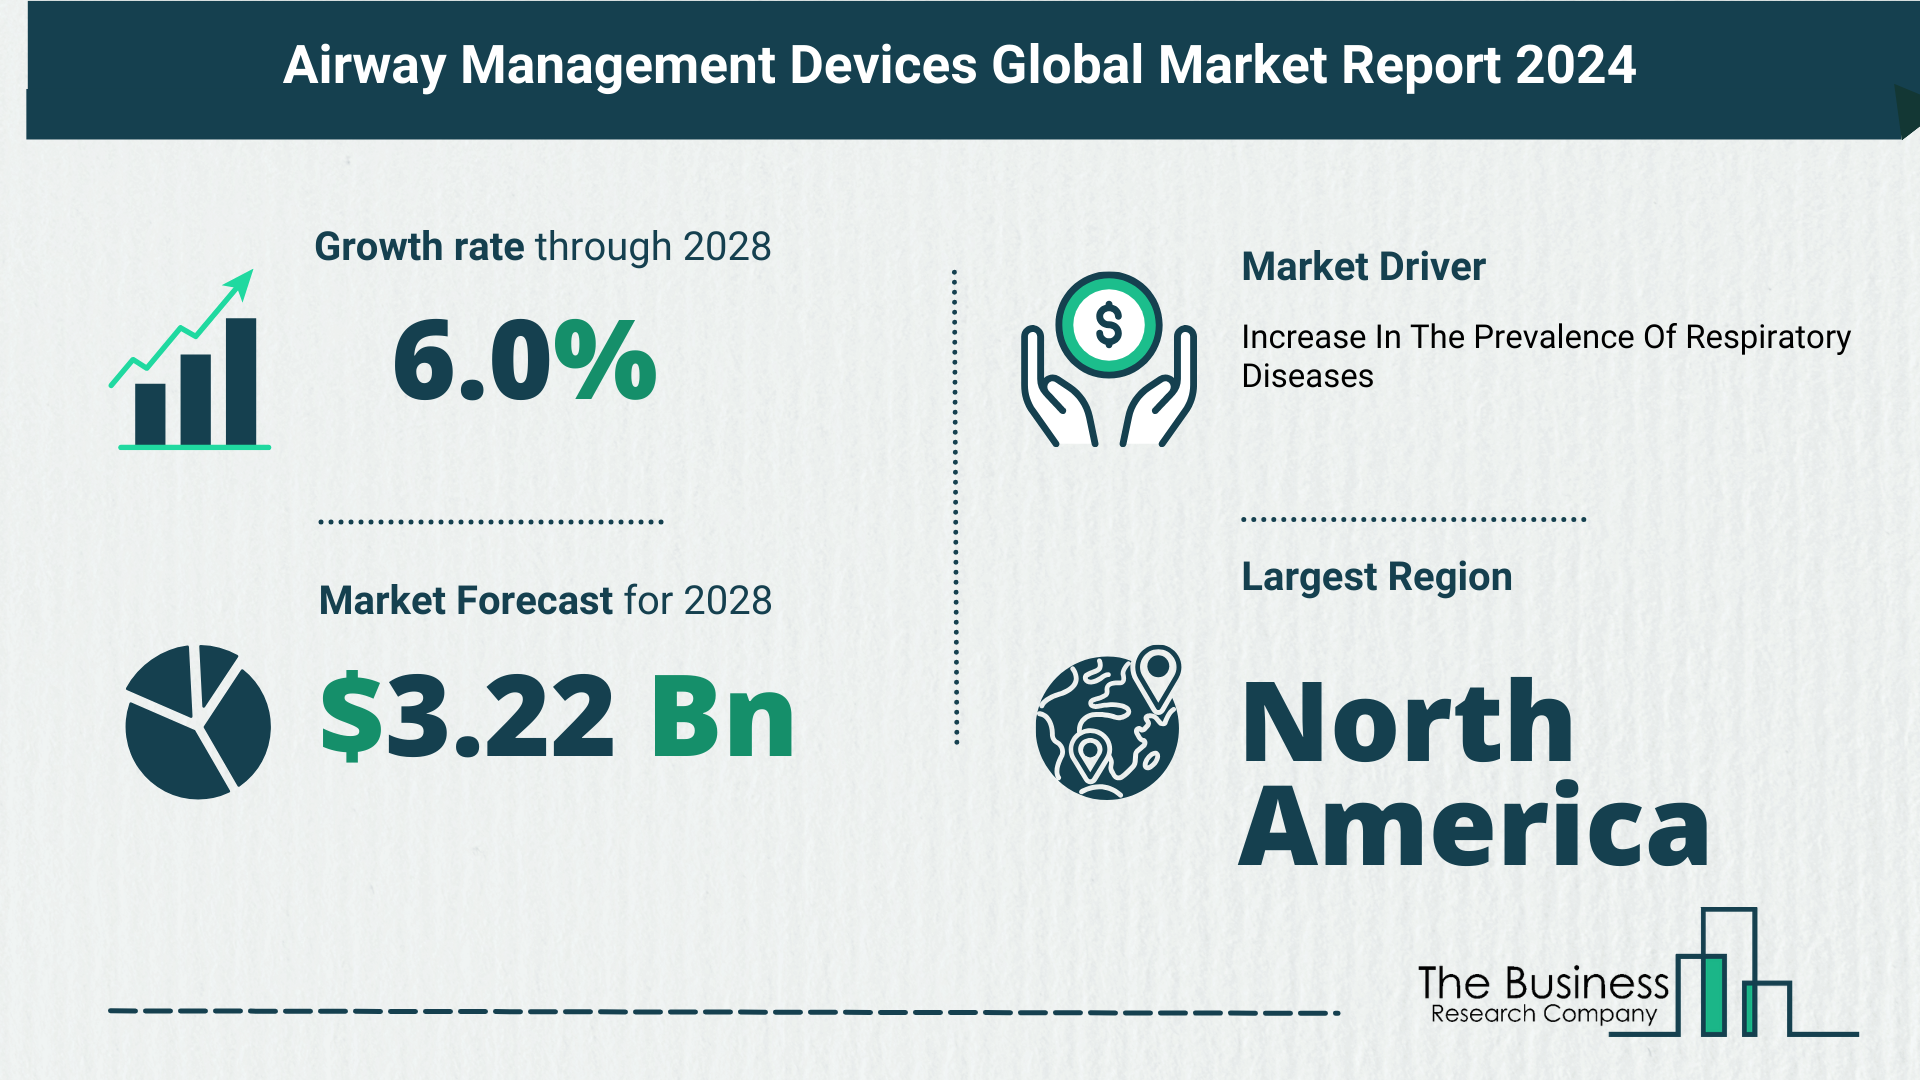 Top 5 Insights From The Airway Management Devices Market Report 2024